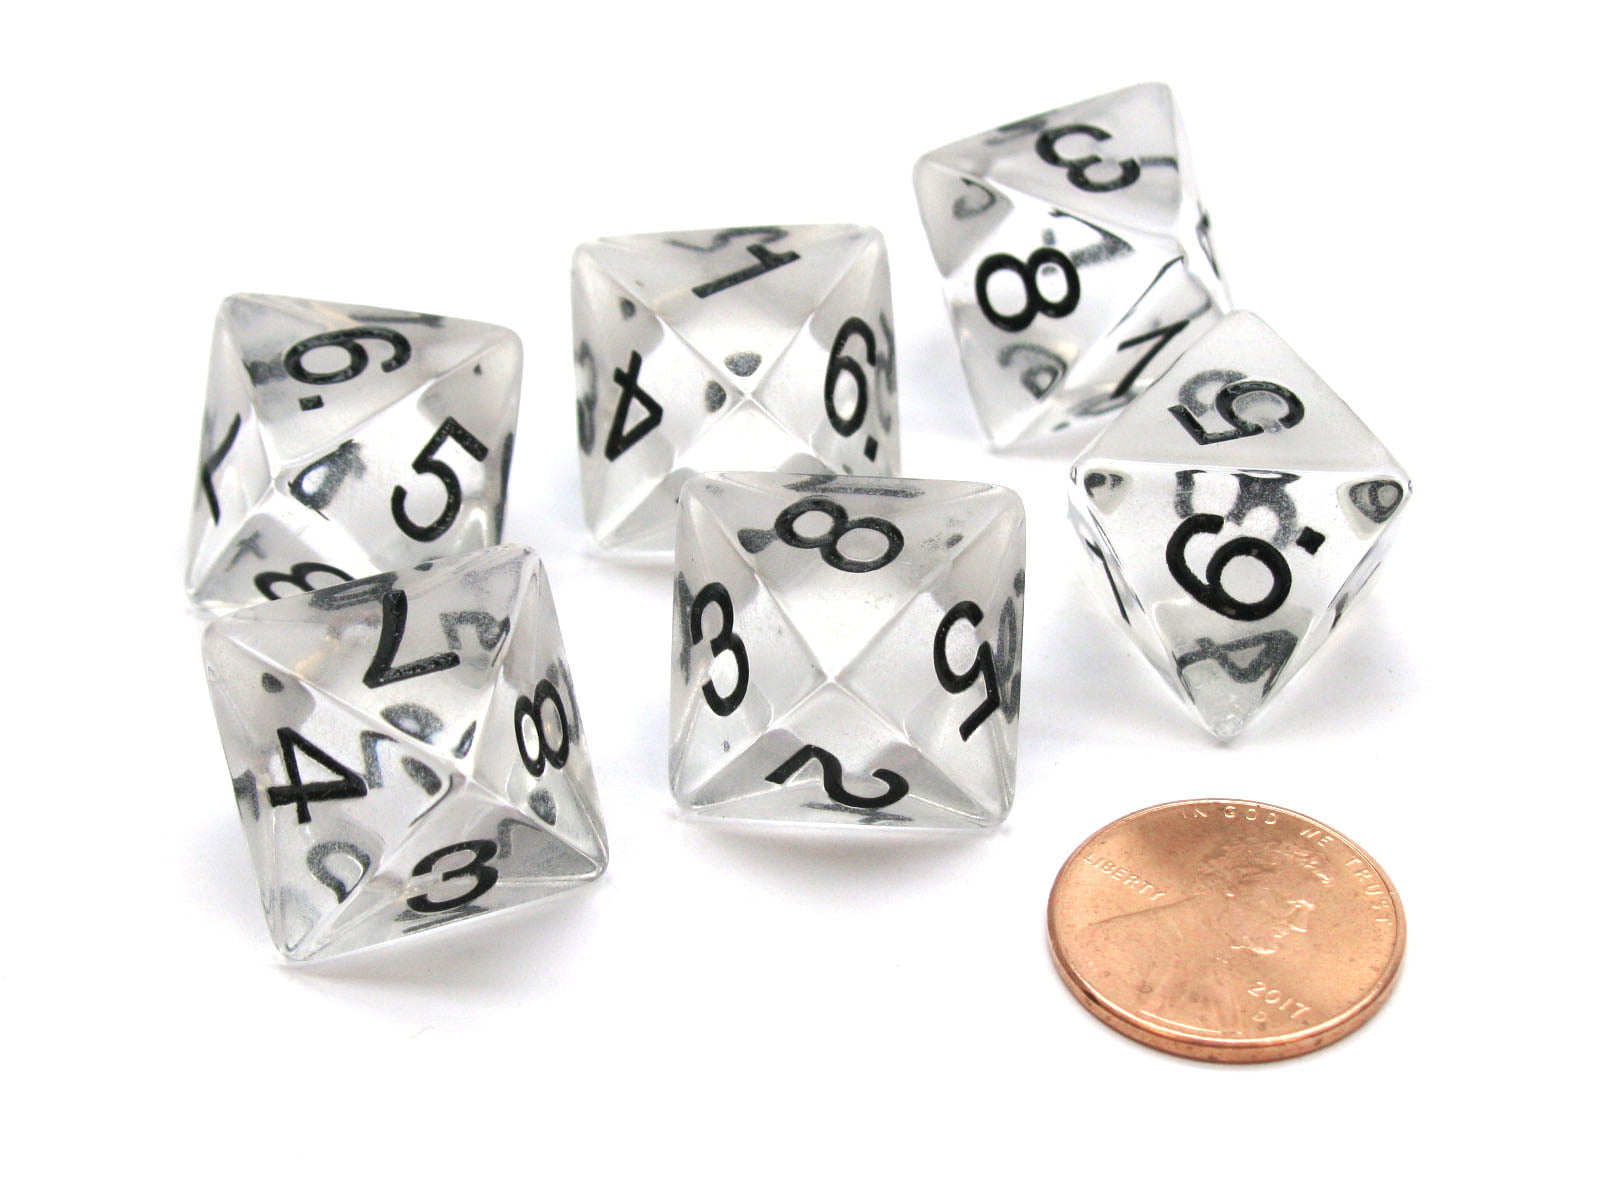 Pack of 2 '3 In a Cube' Dice 1 x 5mm White Dice Inside 25mm Cube 2 x 5mm Red